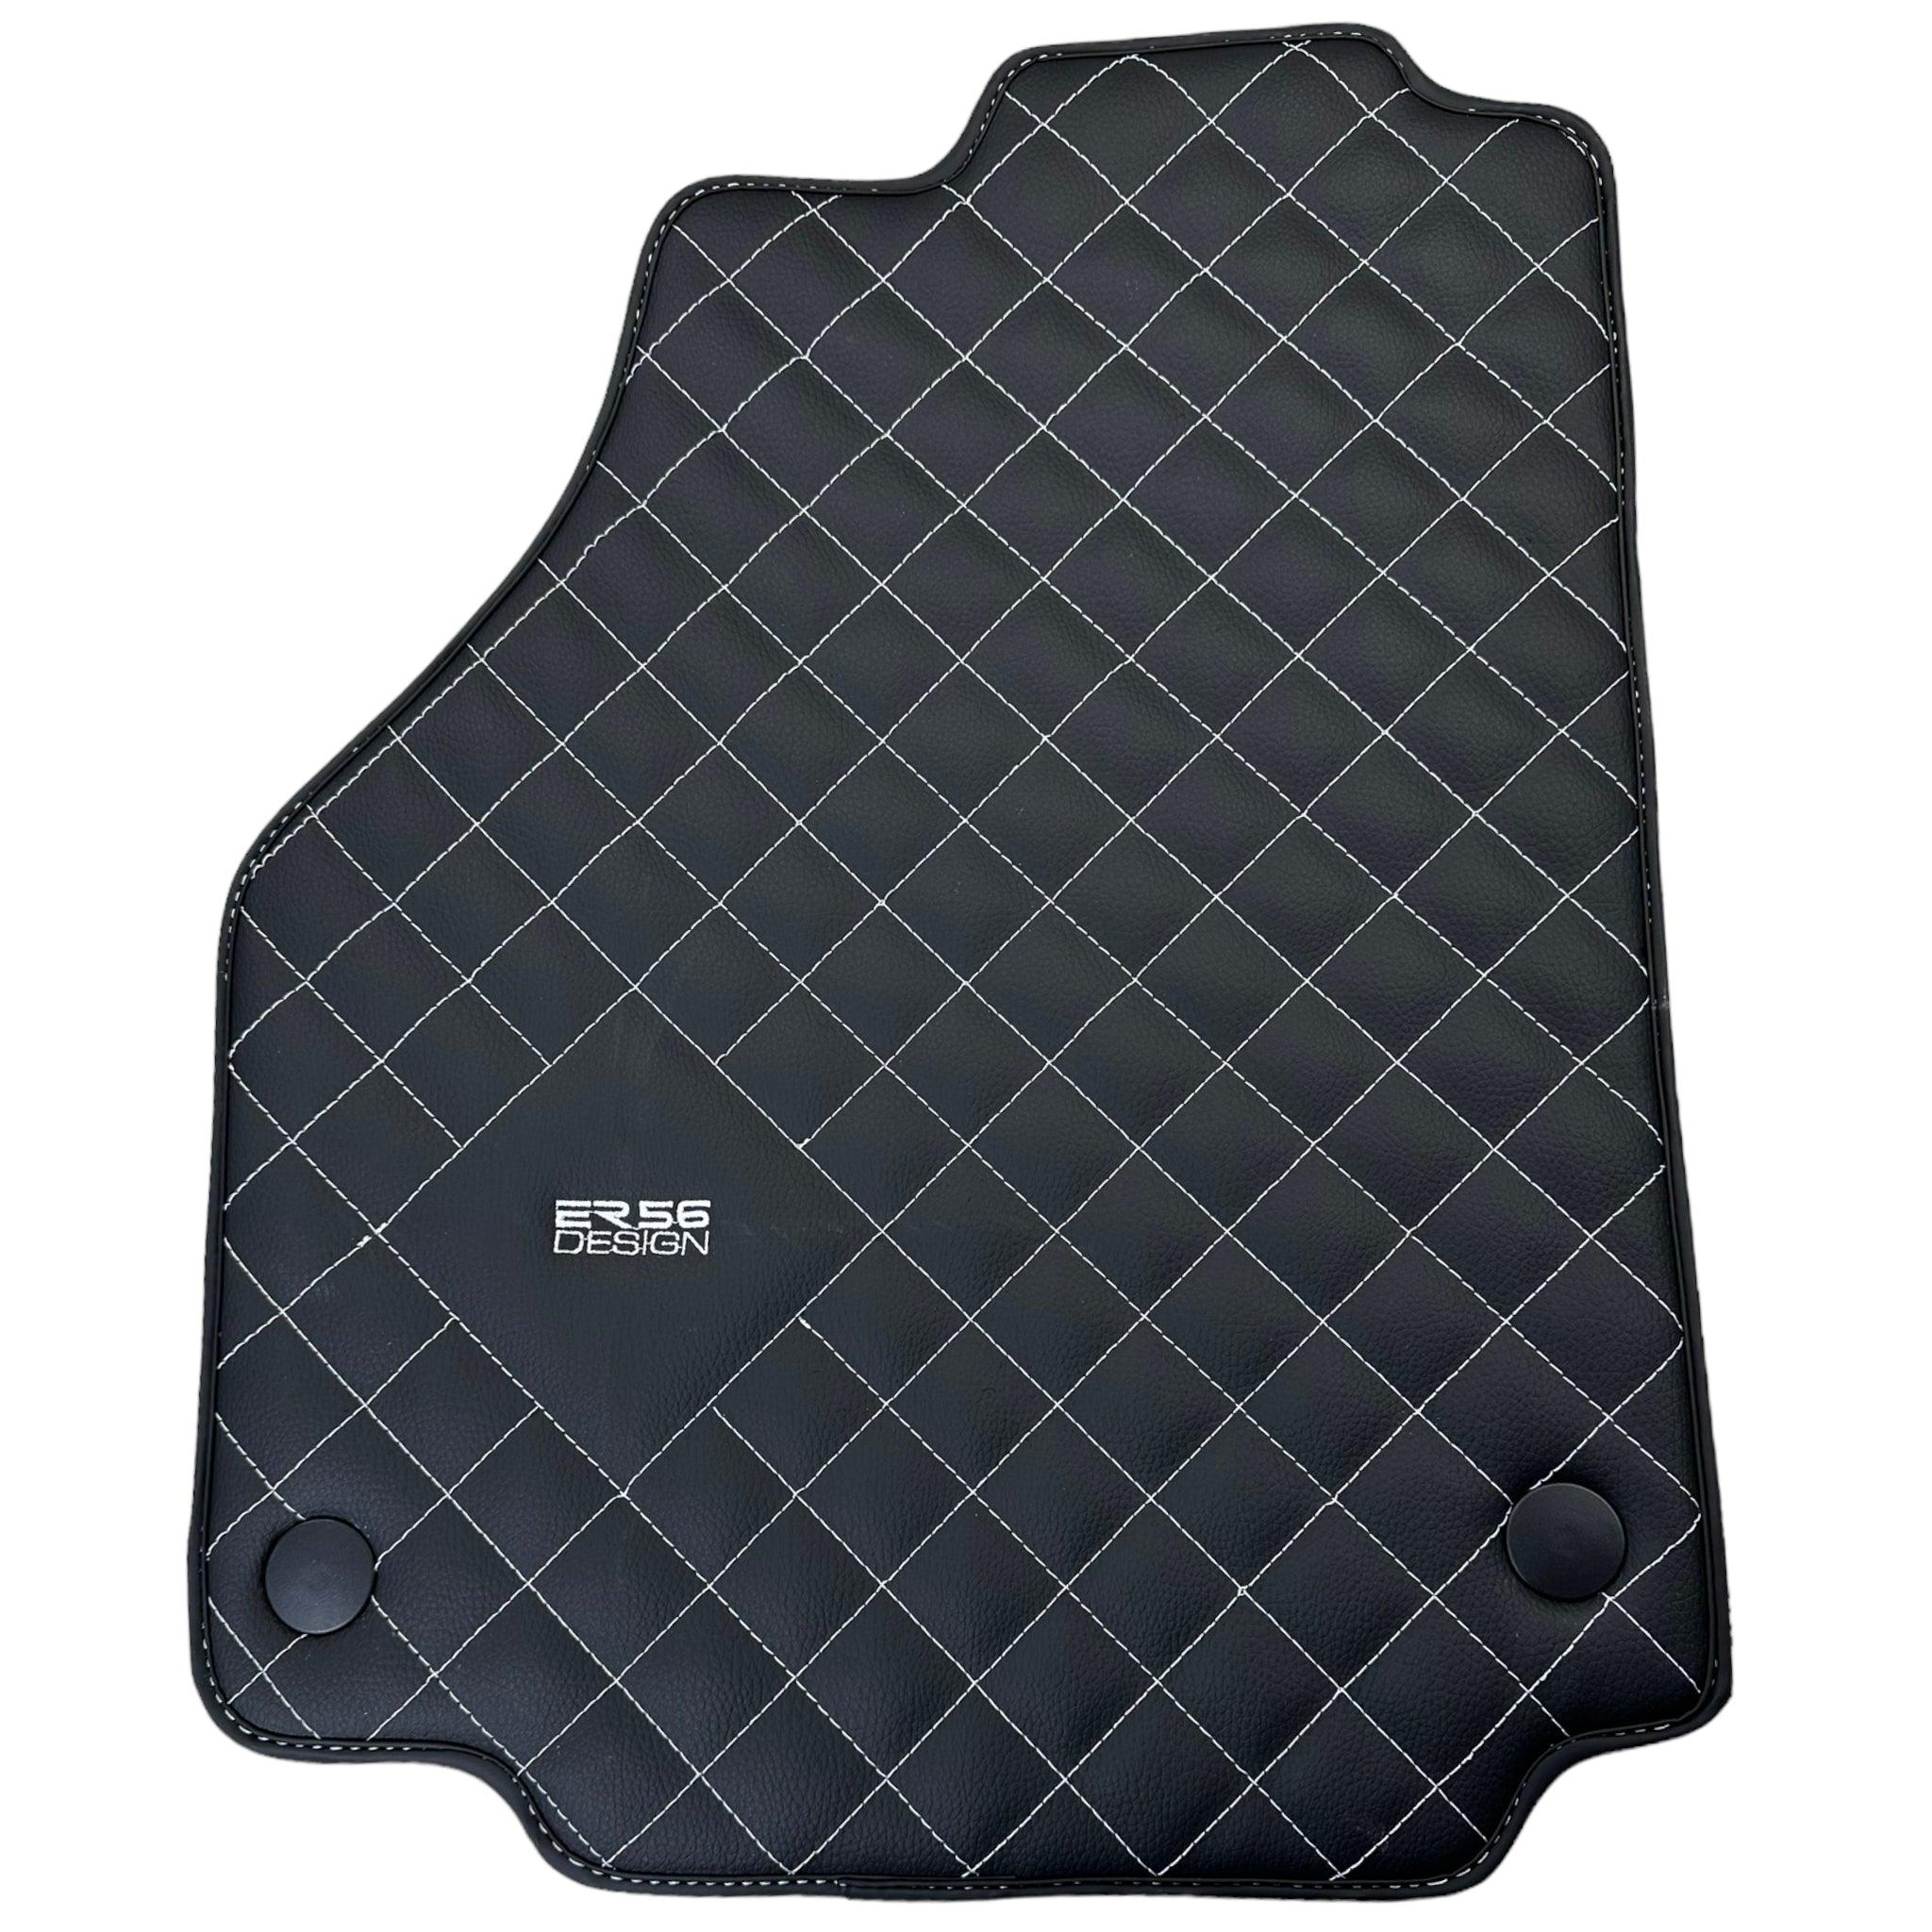 Leather Floor Mats for Ferrari 458 Spider (2012-2015) with White Sewing ER56 Design